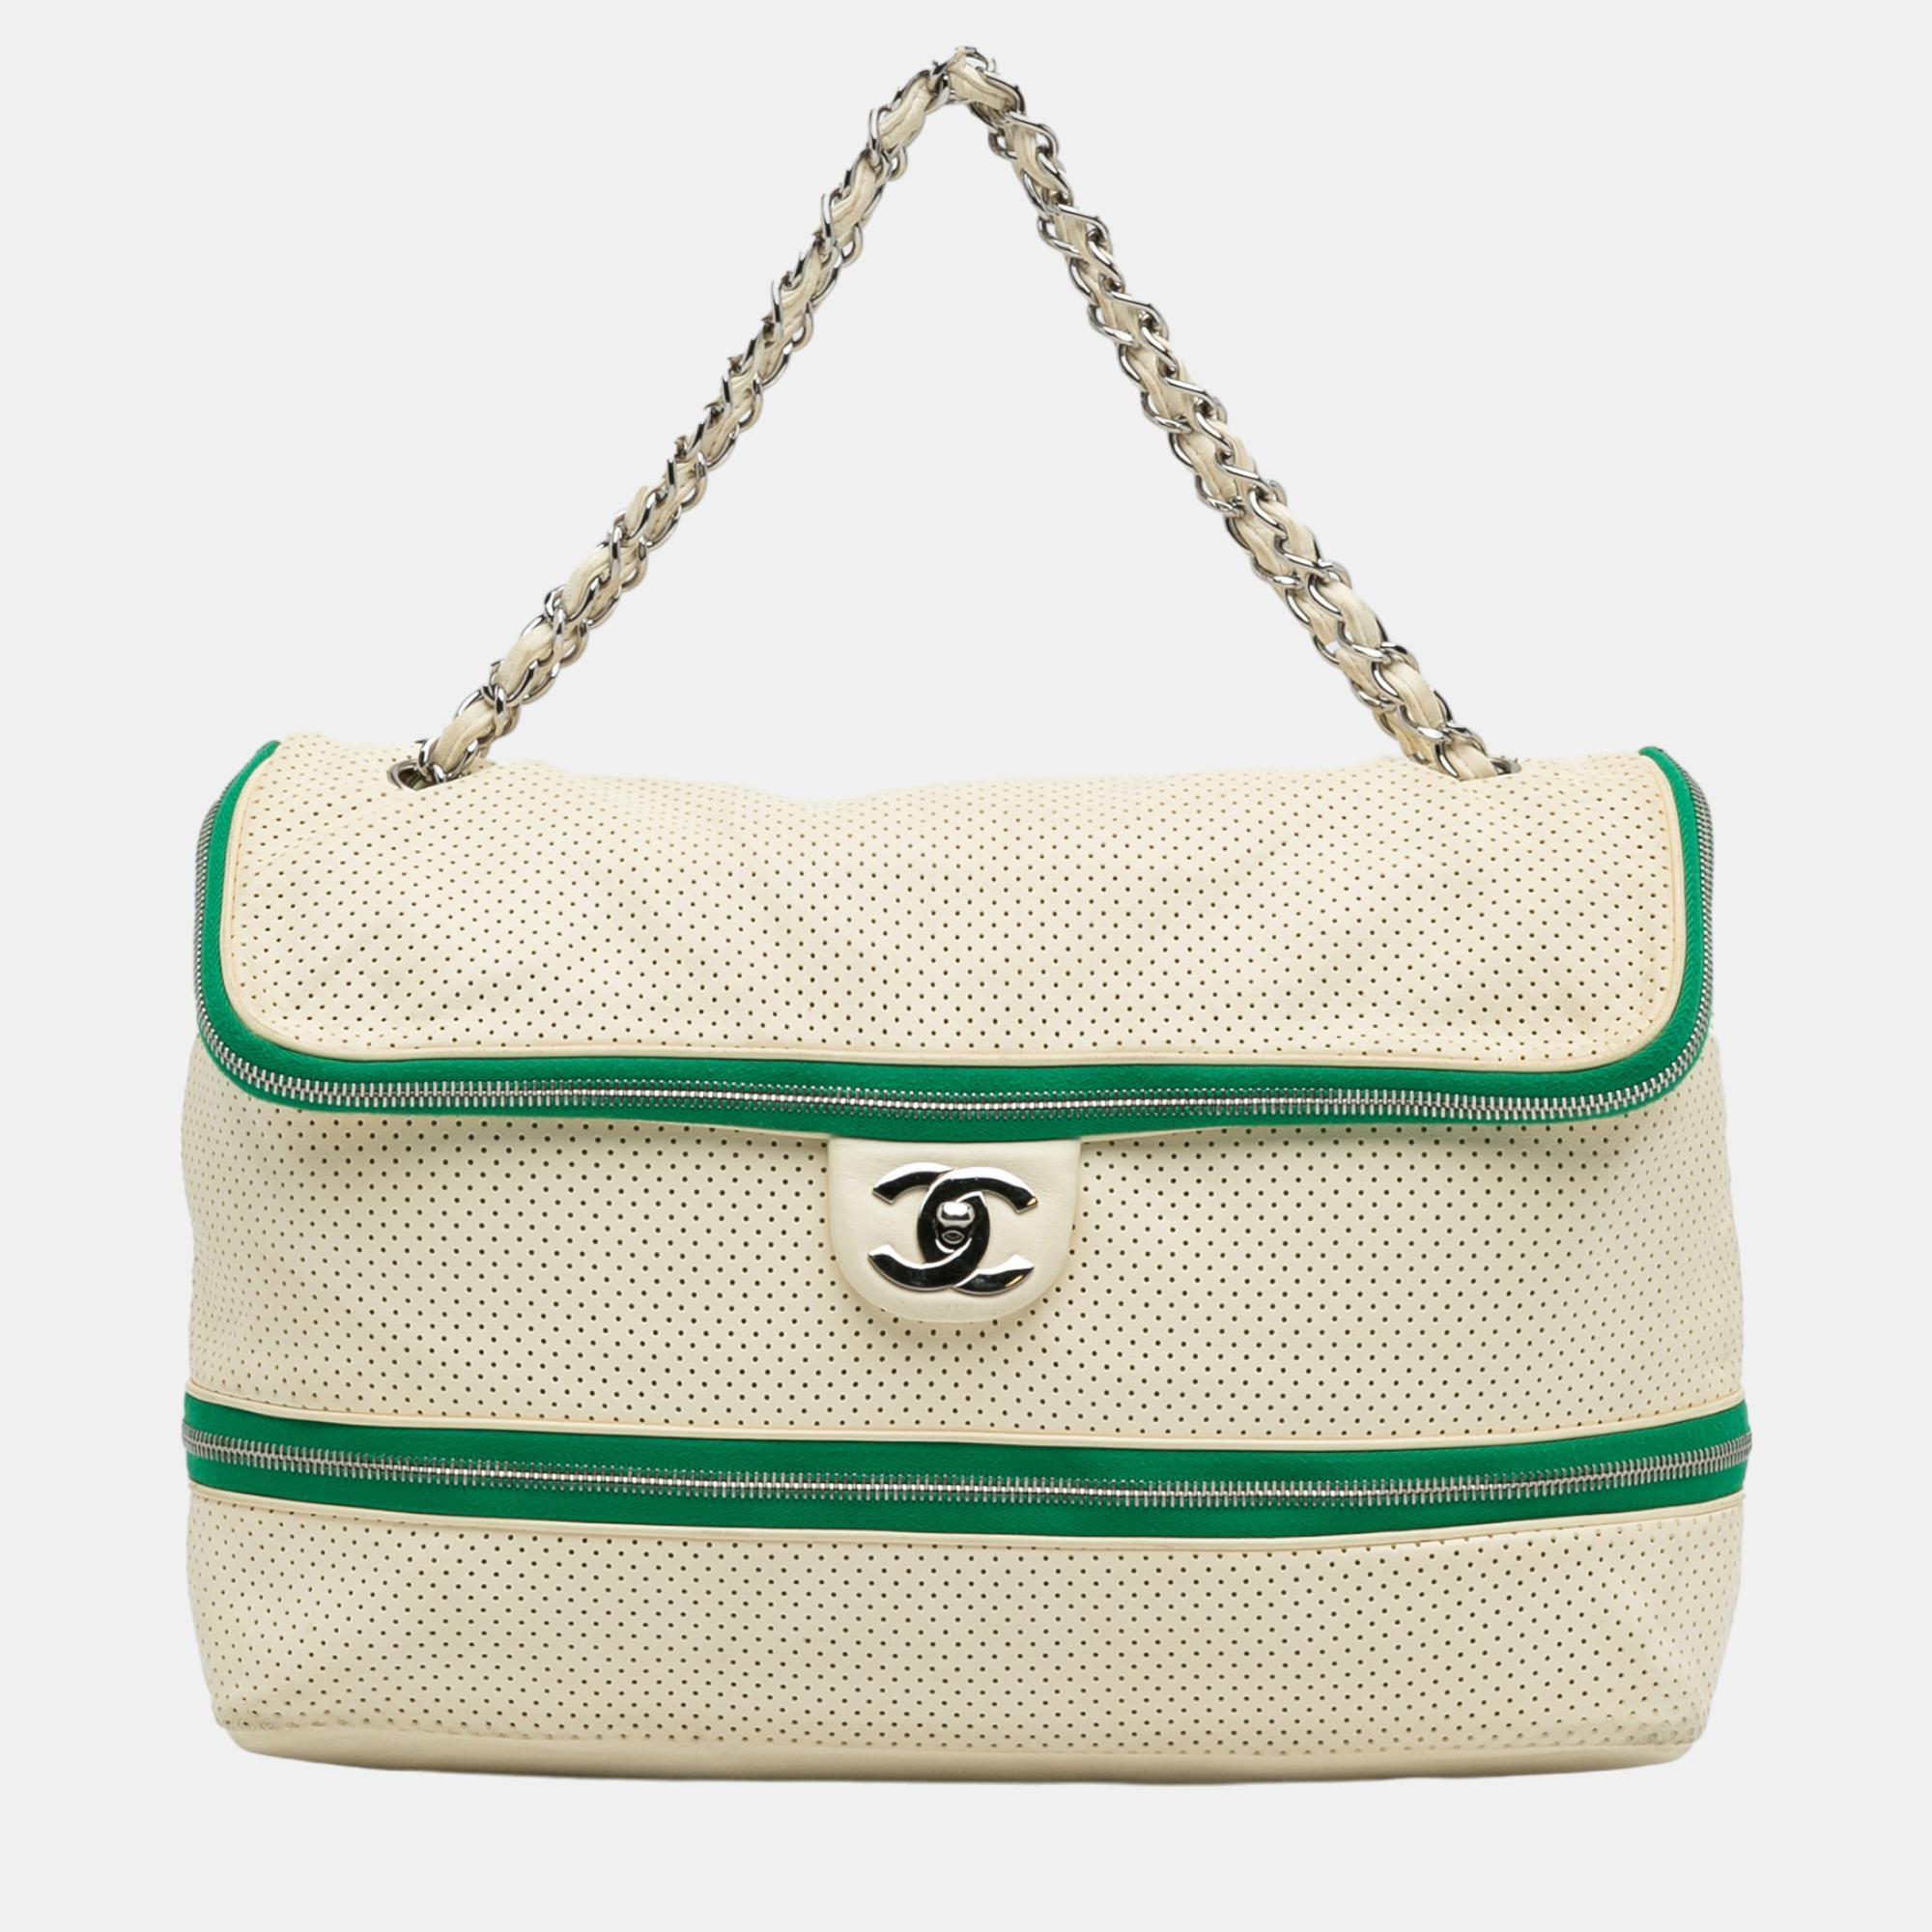 Chanel white perforated expandable shoulder bag